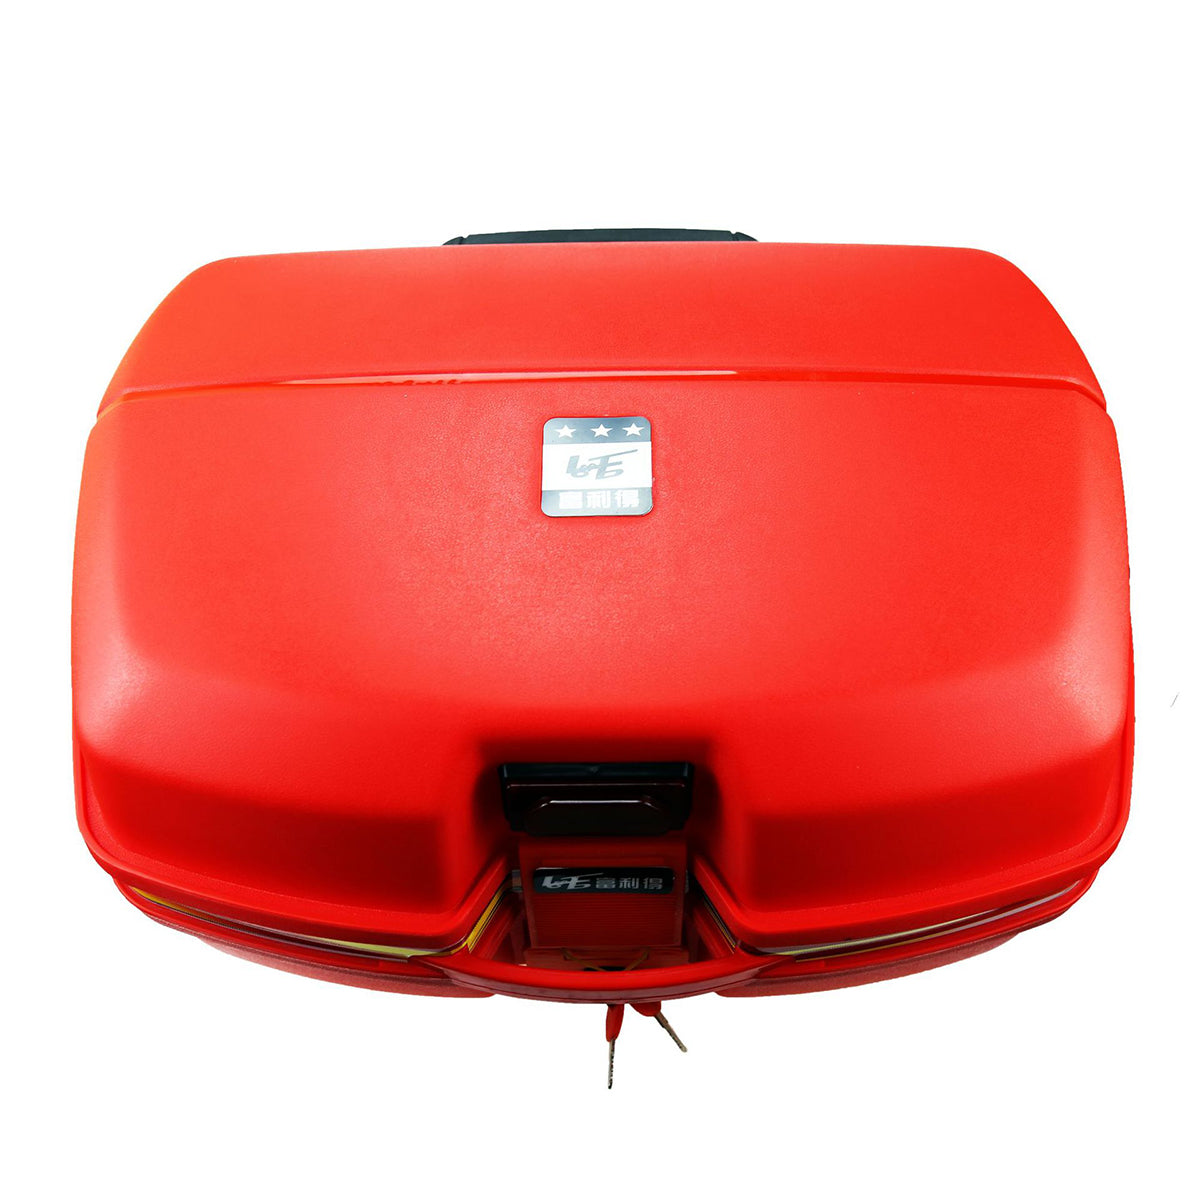 Orange Red Motorcycle Tour Tail Box Scooter Trunk Luggage Top Lock Storage Carrier Case